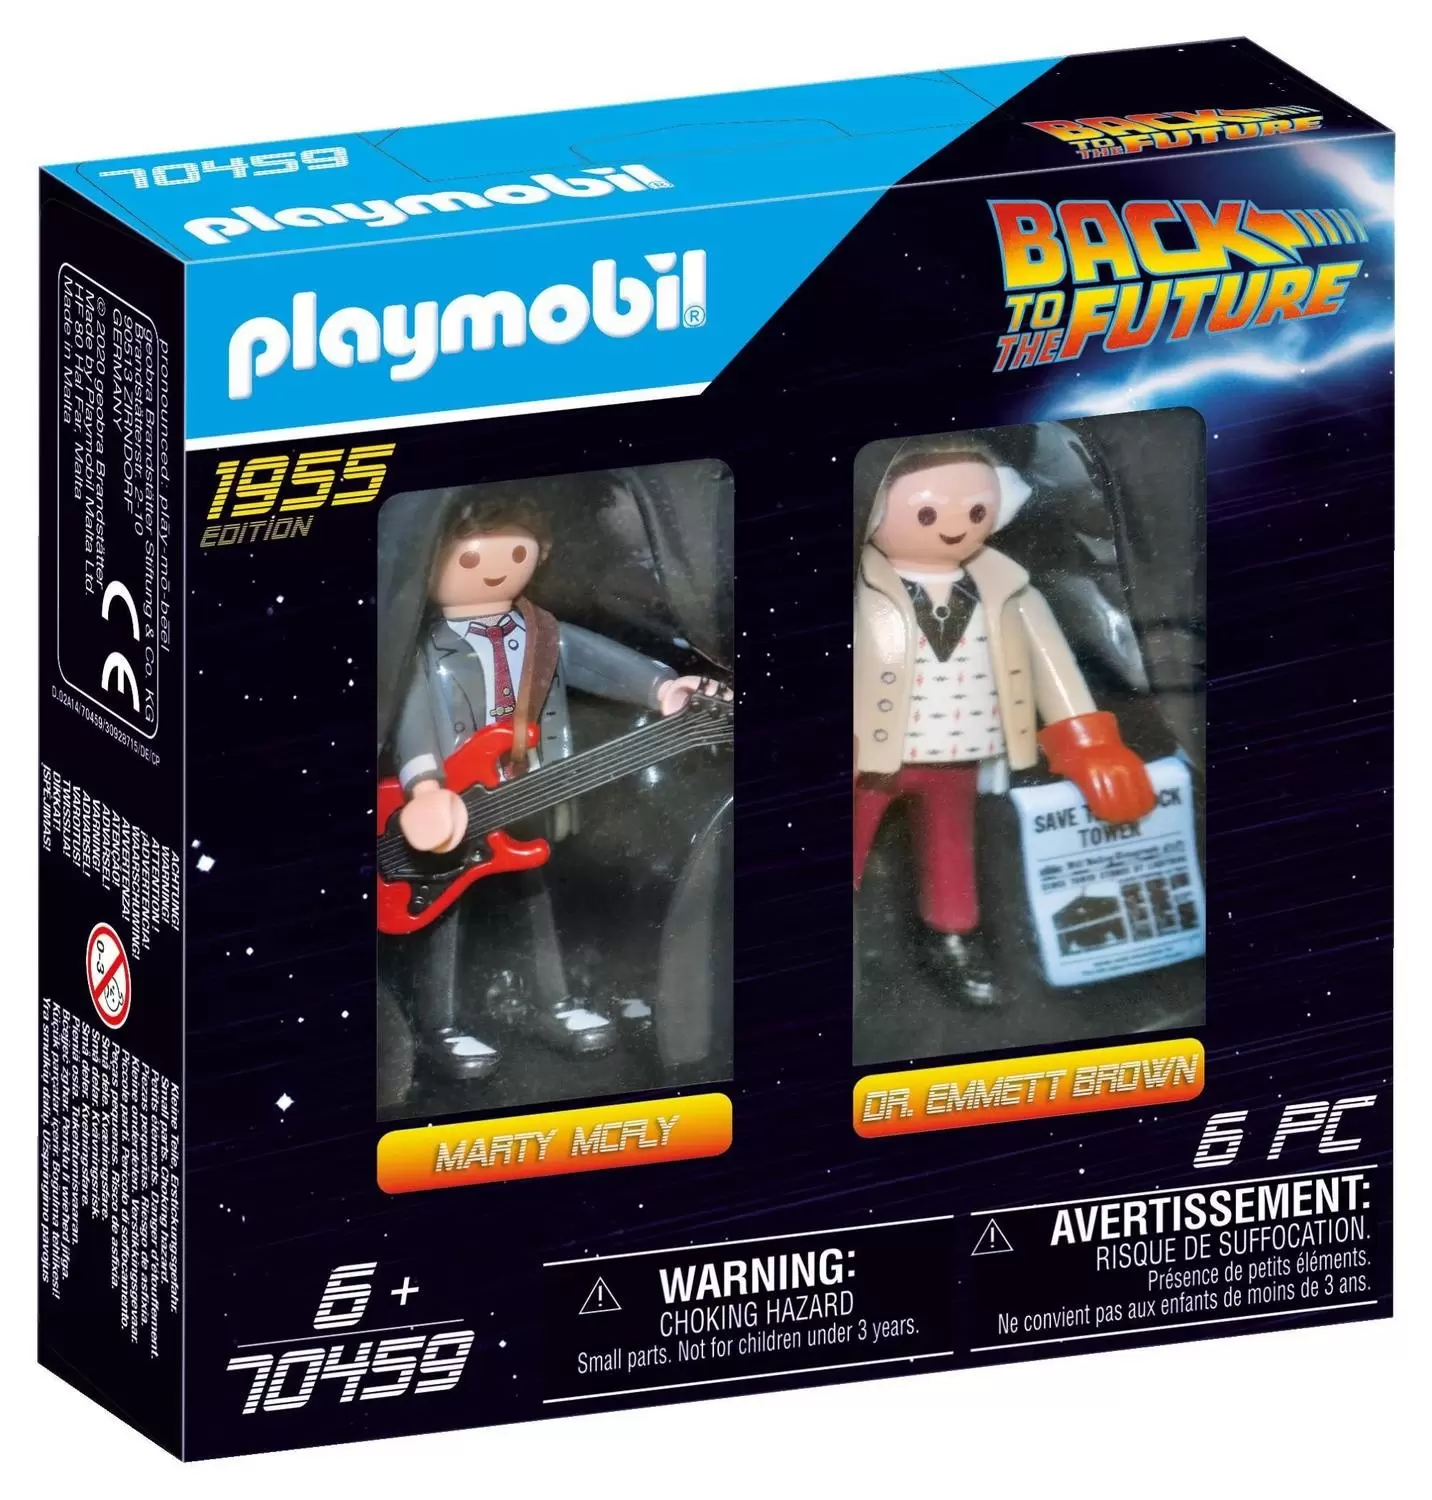 Playmobil Back to the Future - Back to the Future - Marty McFly & Dr. Emmett Brown - 1955 Edition